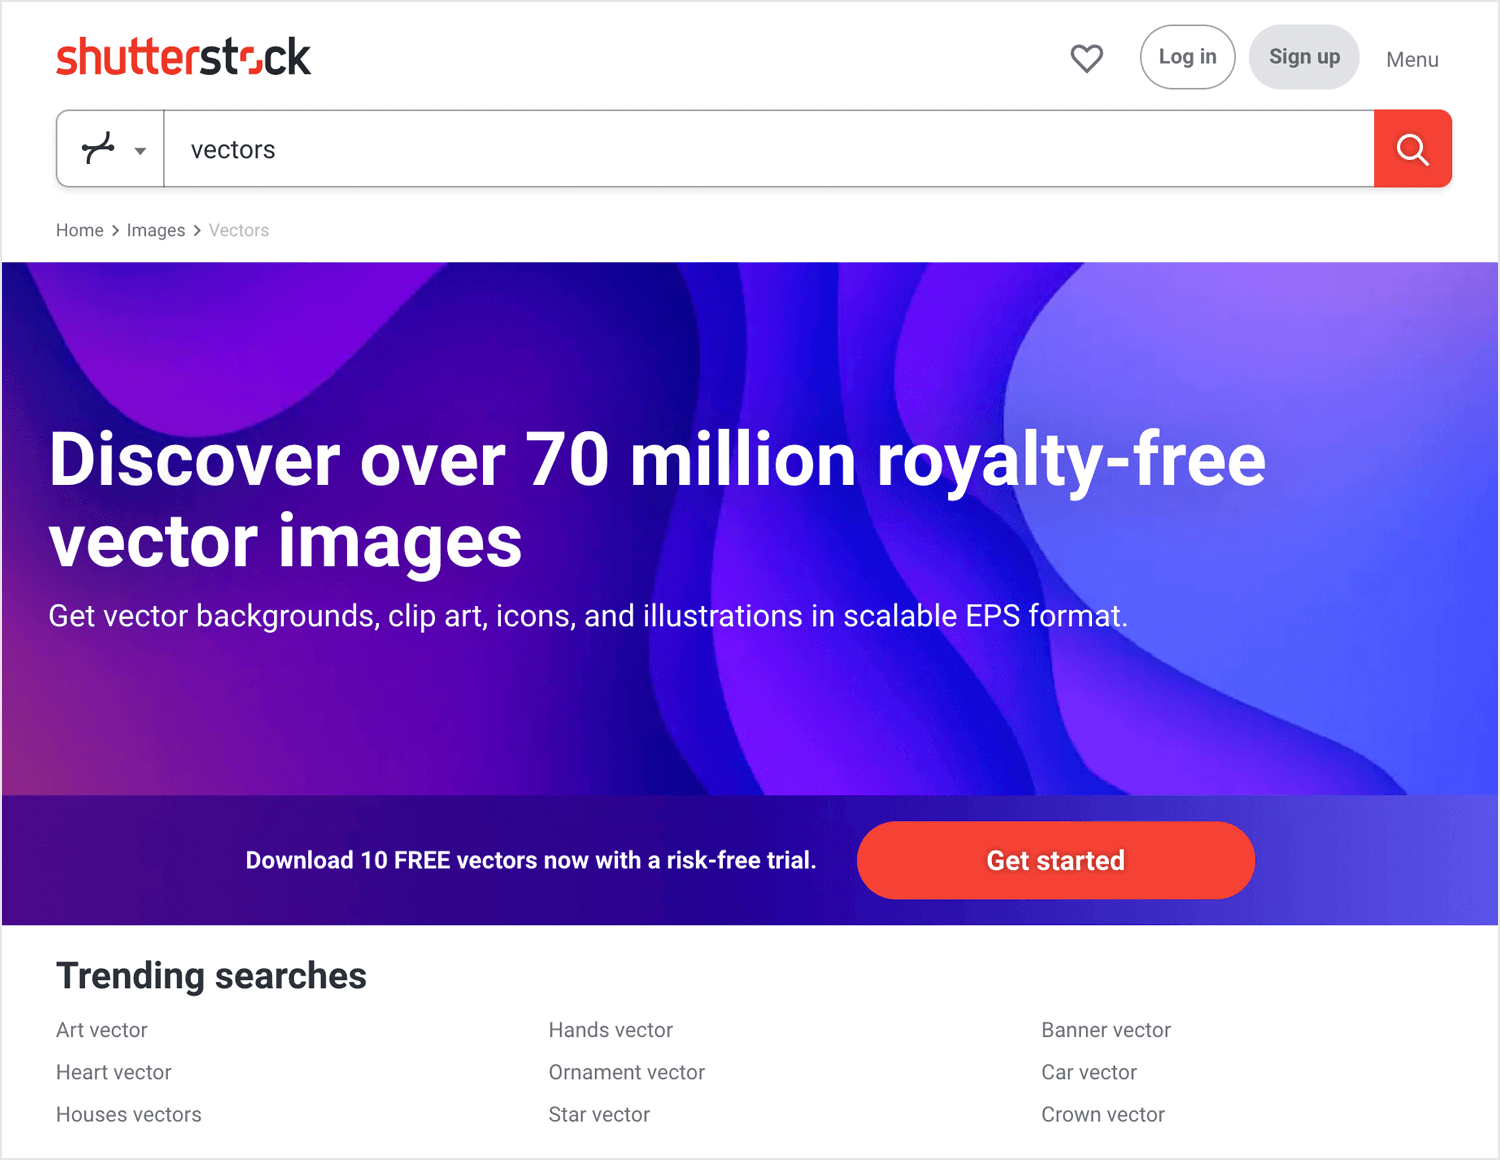 Free vector images - Shutterstock homepage